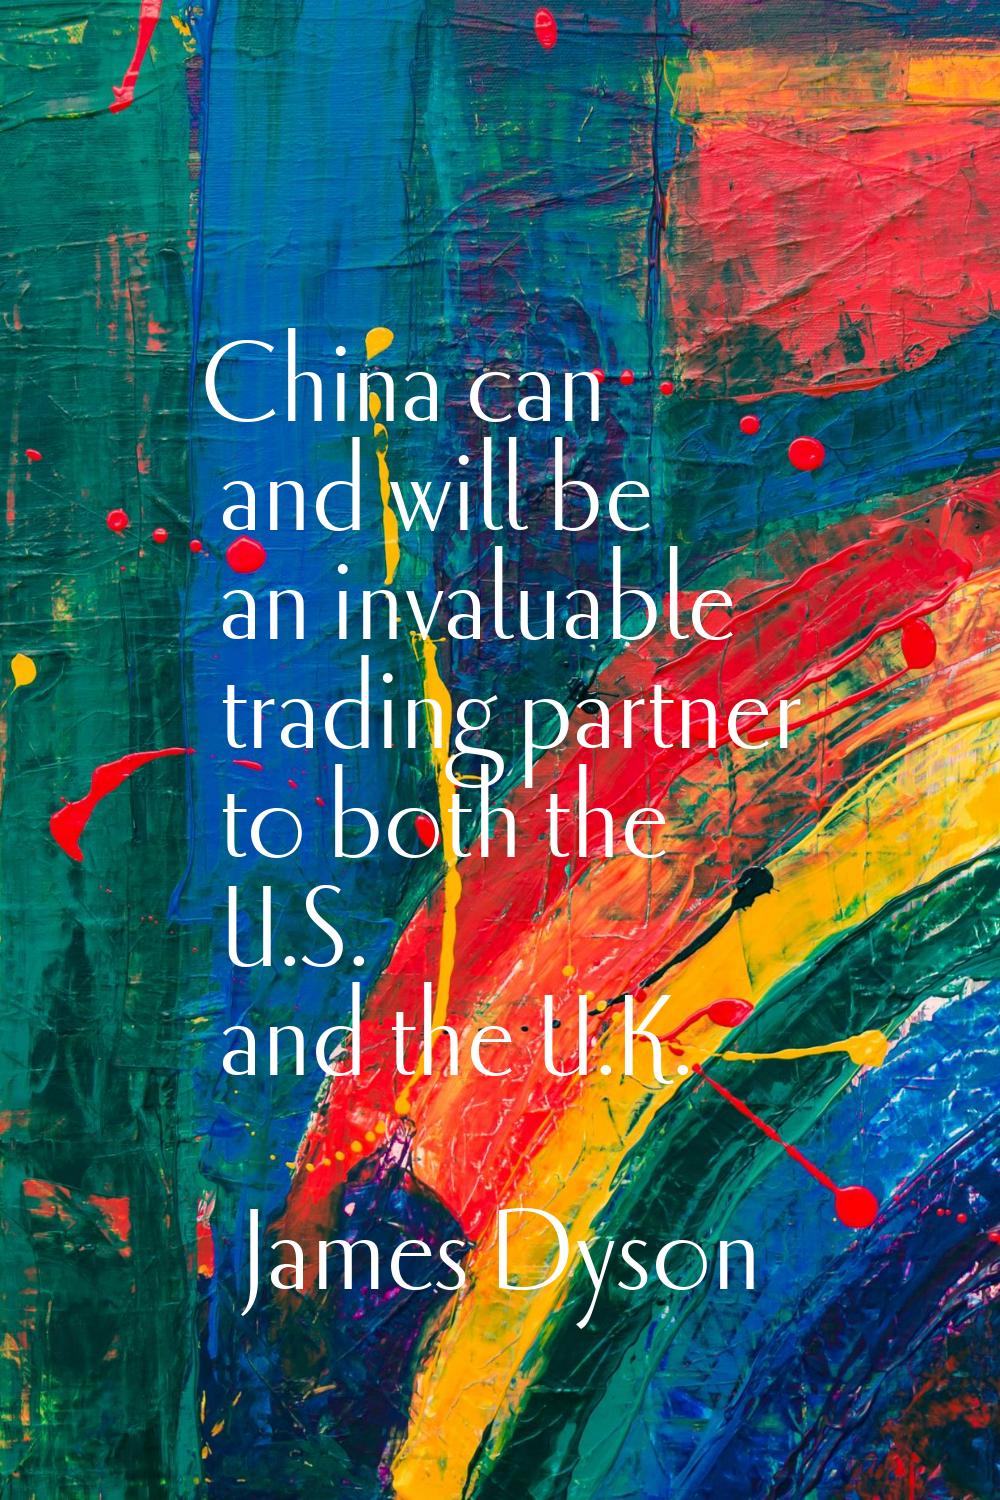 China can and will be an invaluable trading partner to both the U.S. and the U.K.